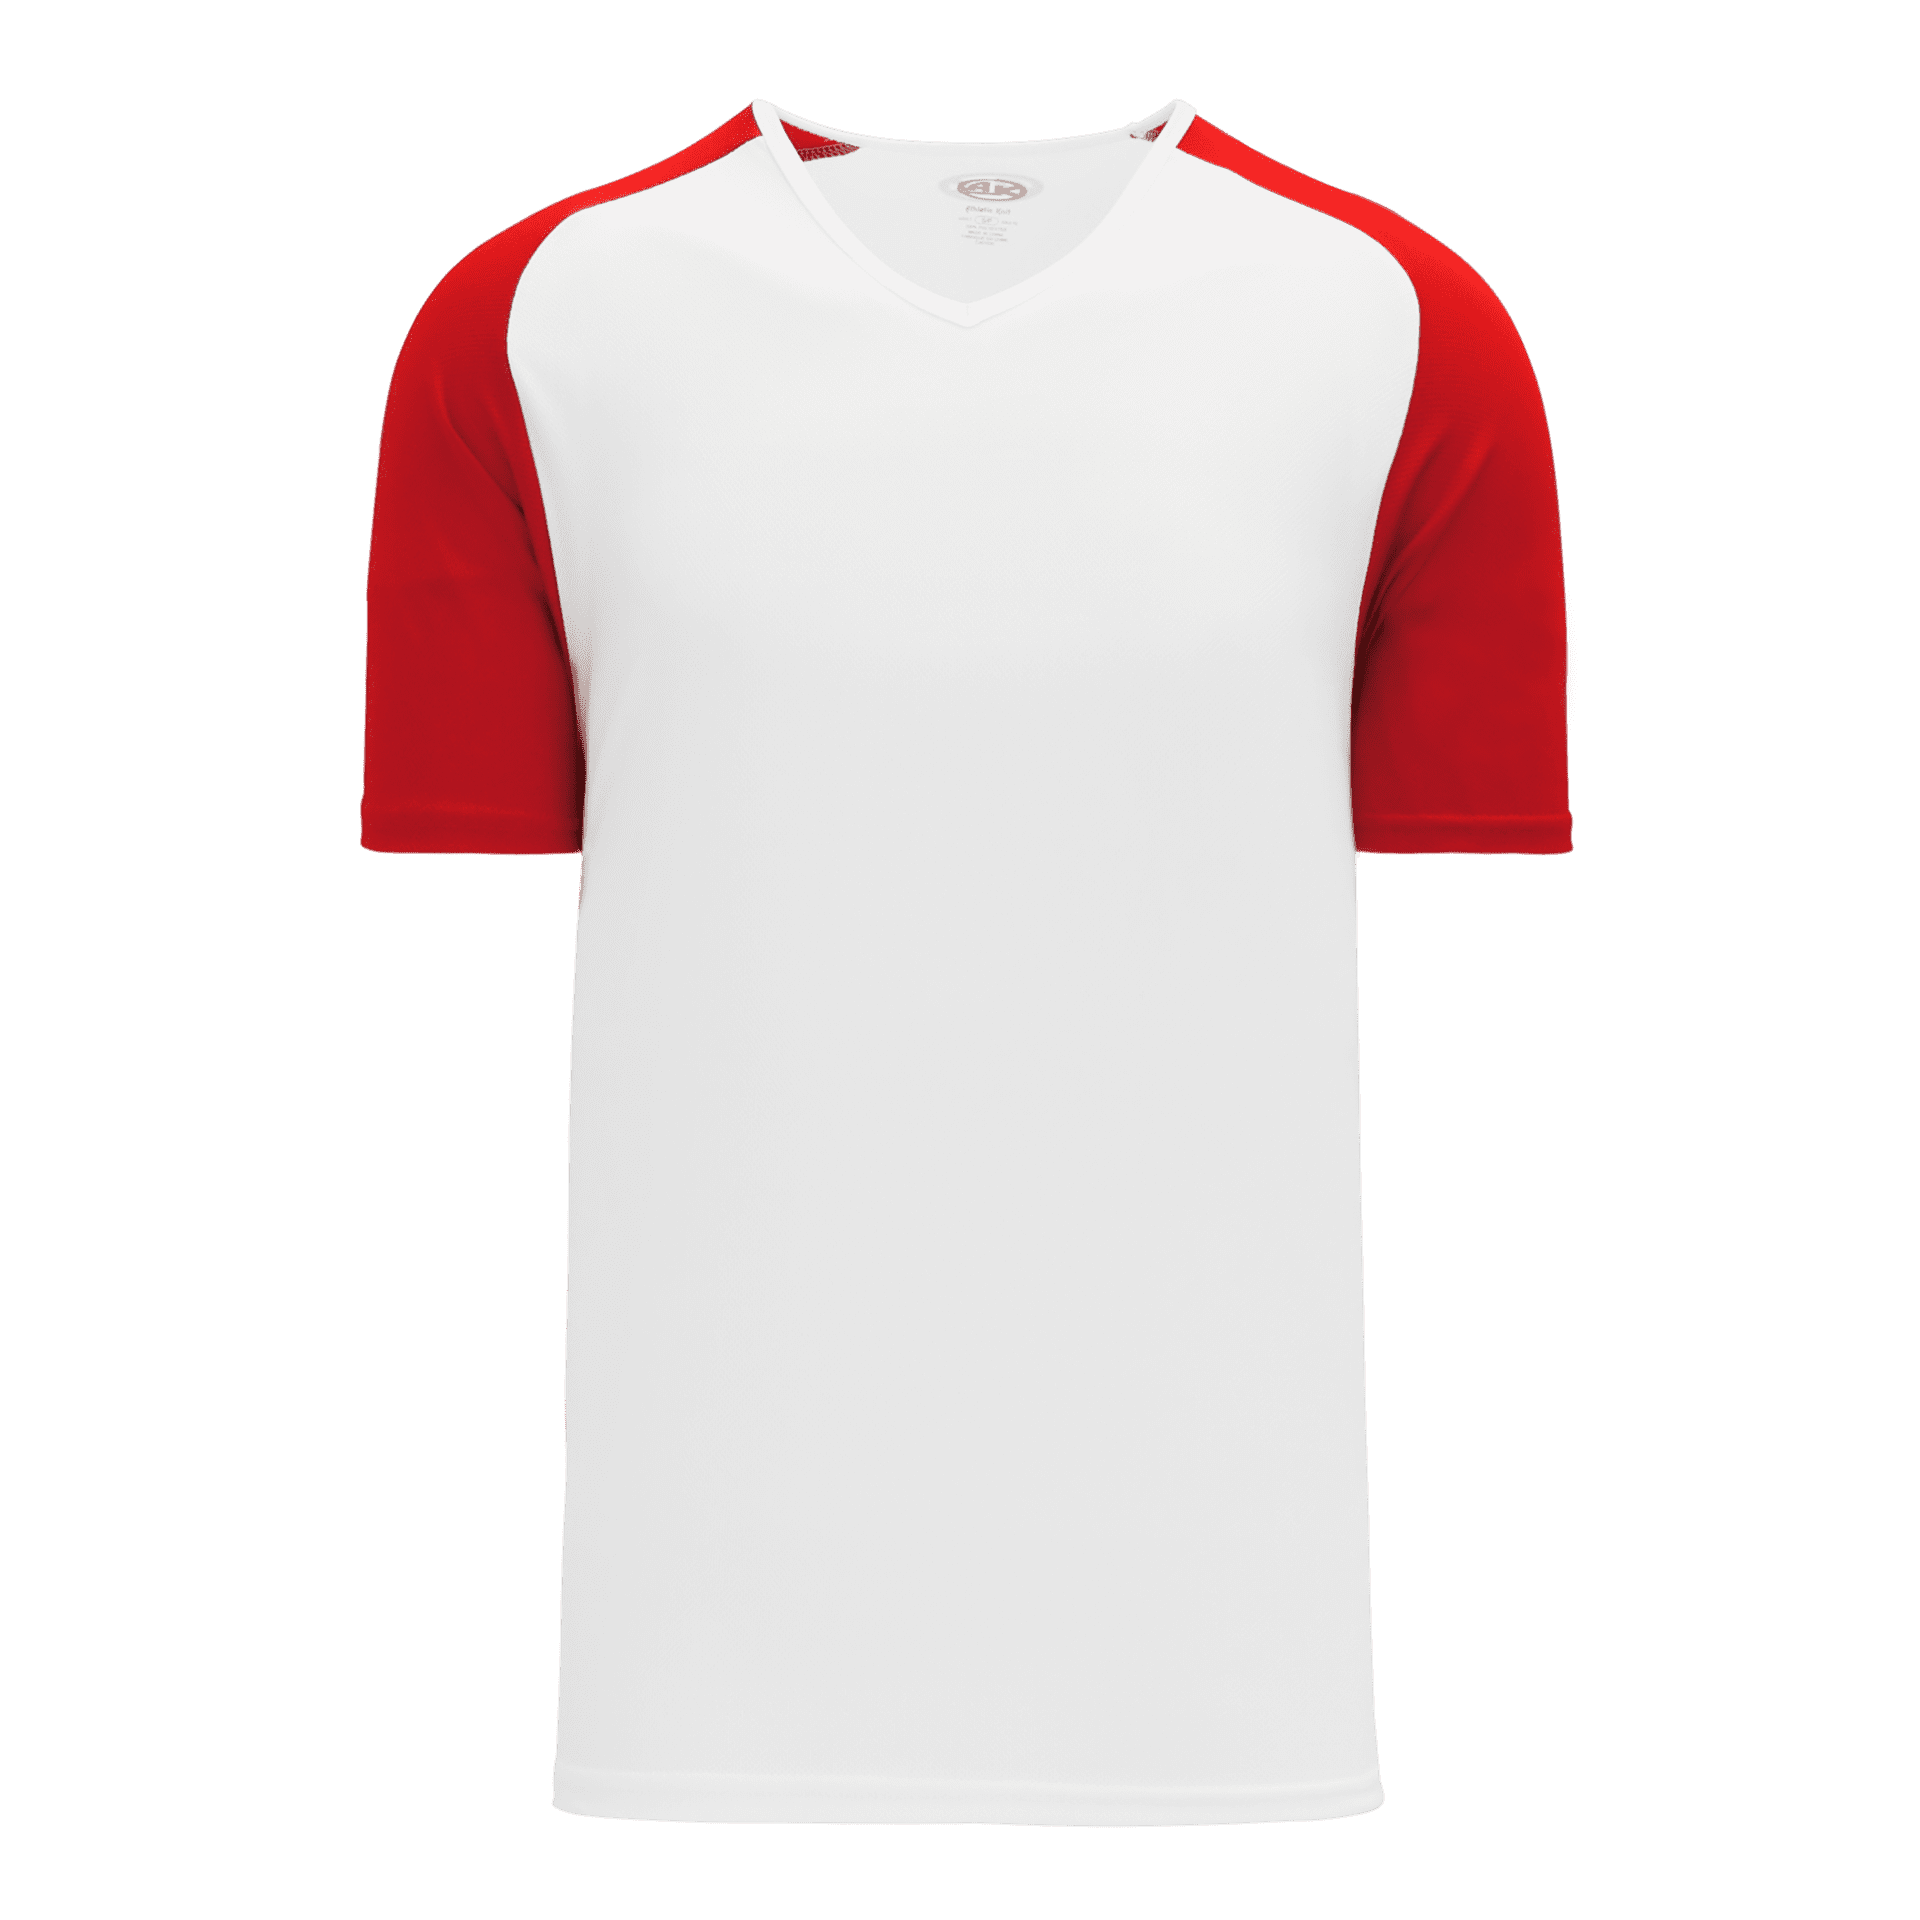 ATHLETIC KNIT DRYFLEX SHORT SLEEVE SHIRT #A1375 White / Red